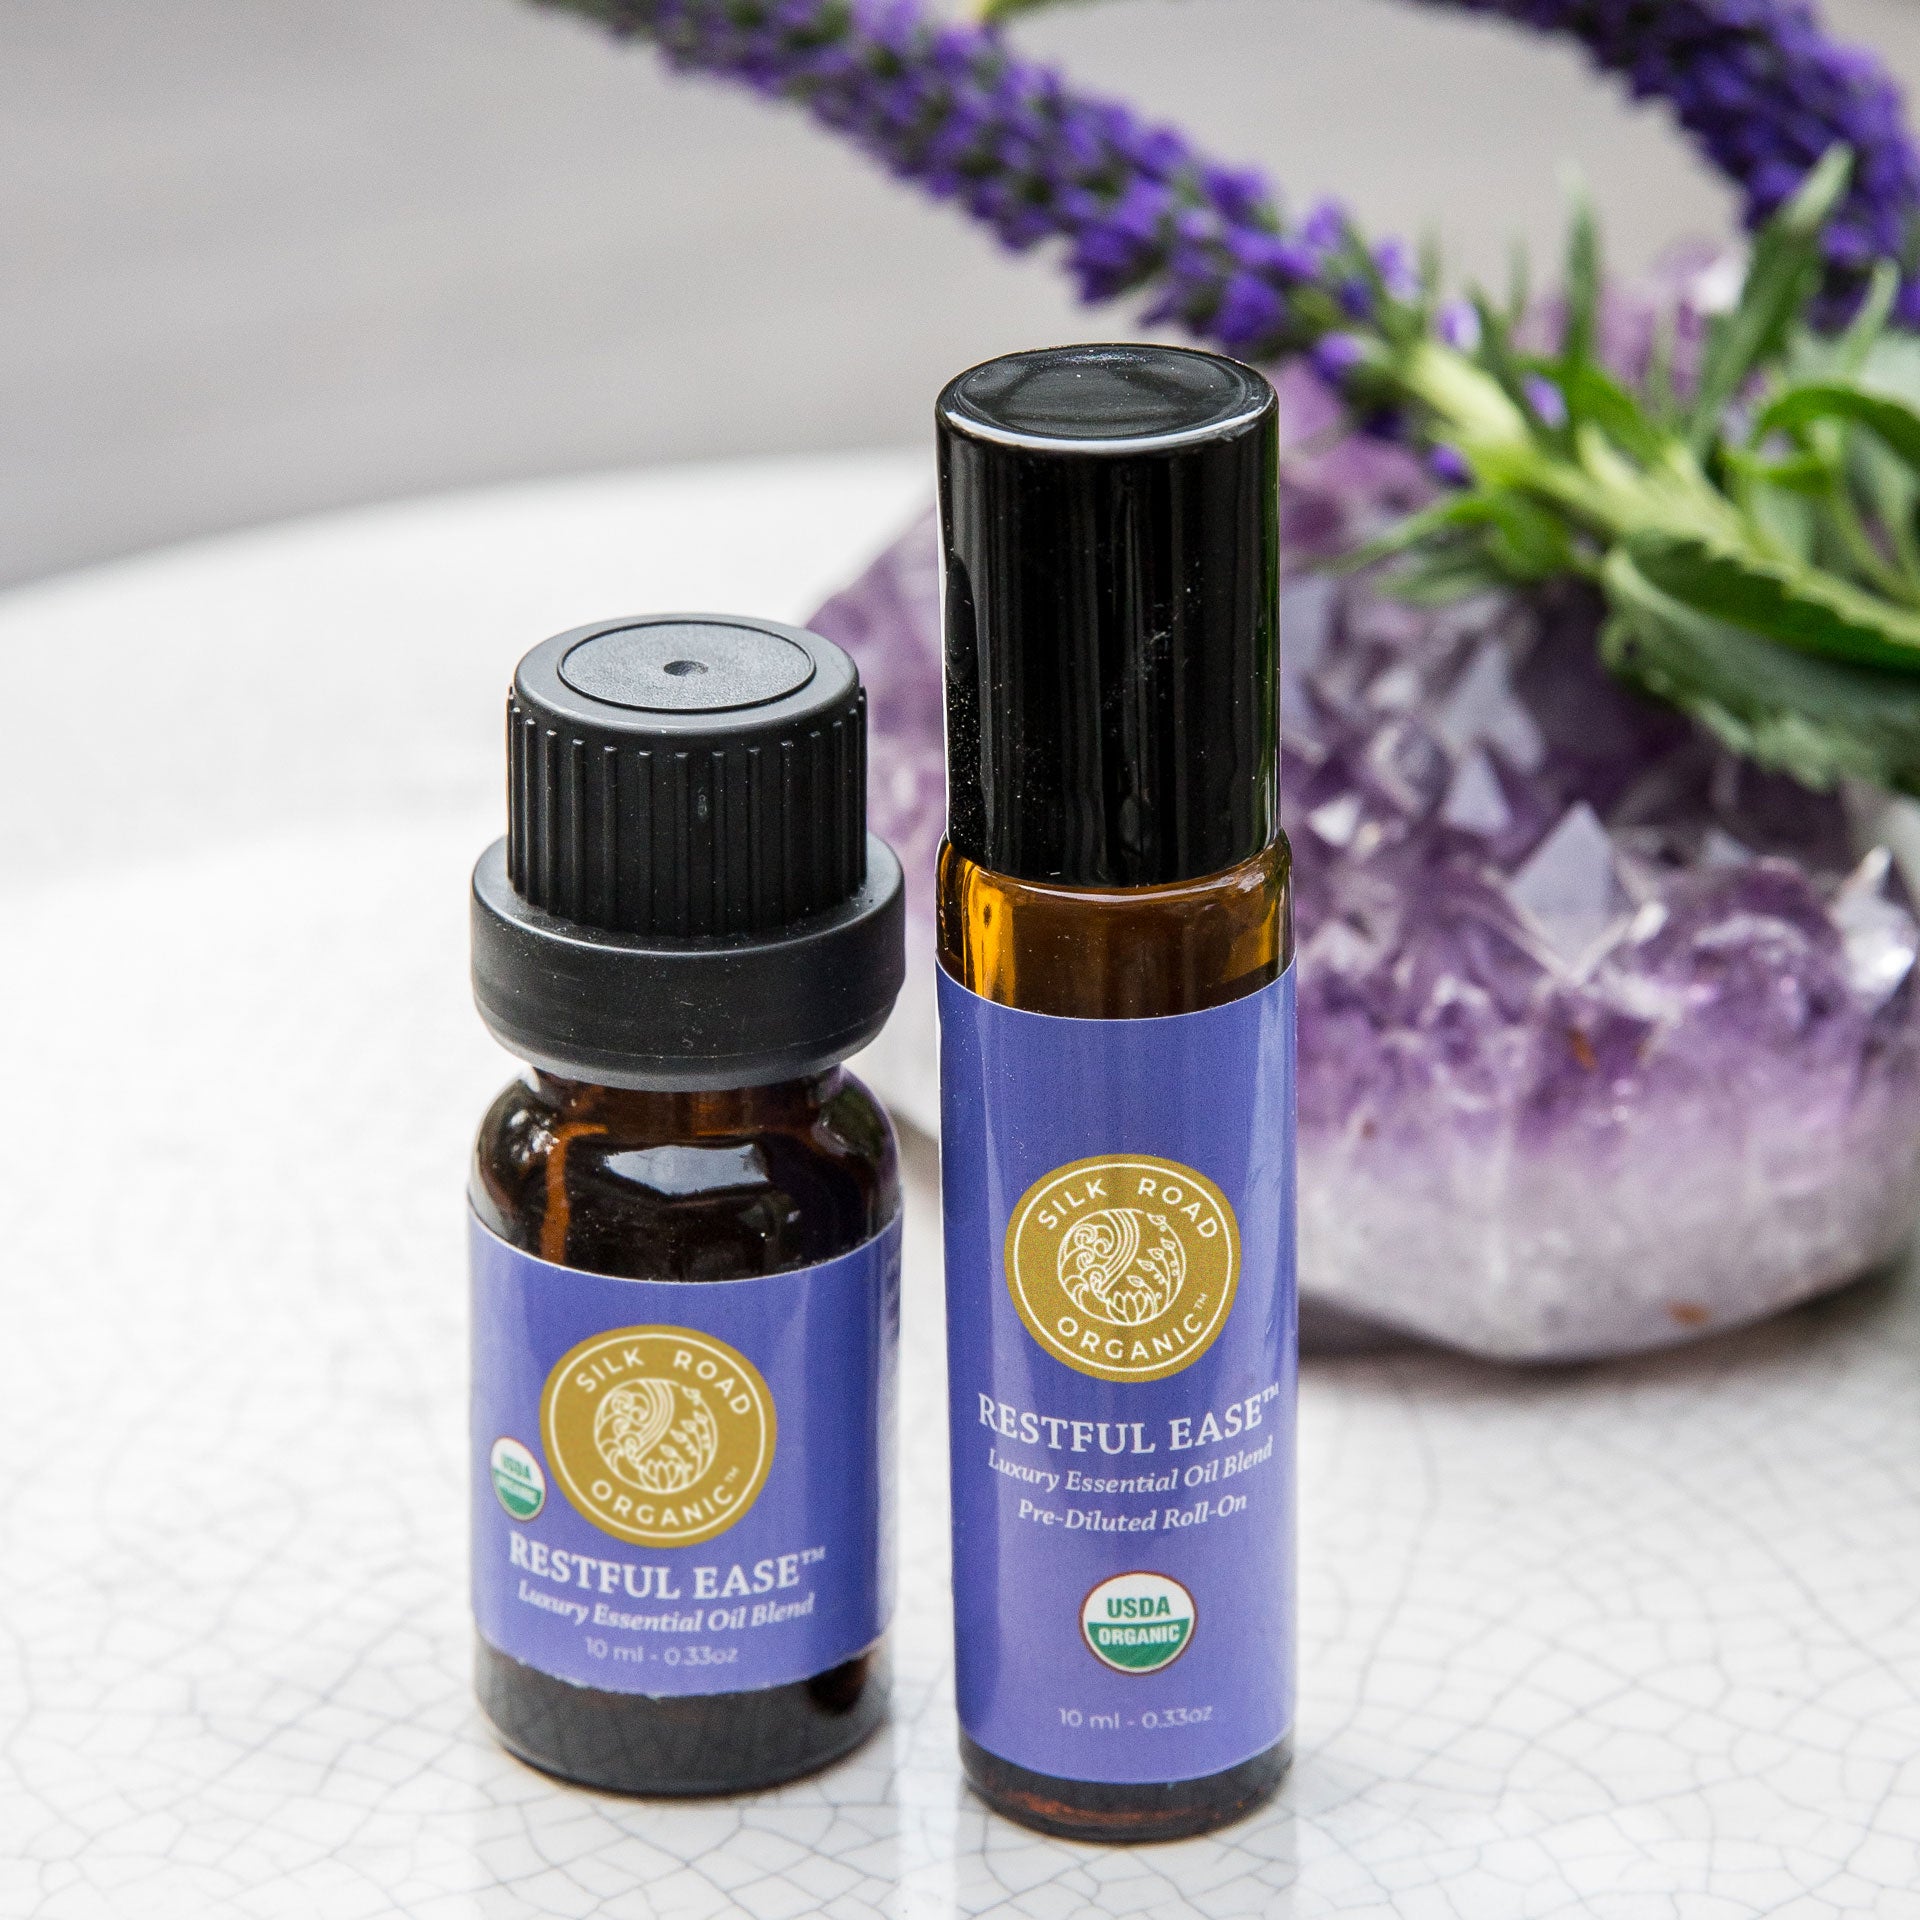 restful ease essential oil blend create calm relax bedtime serenity